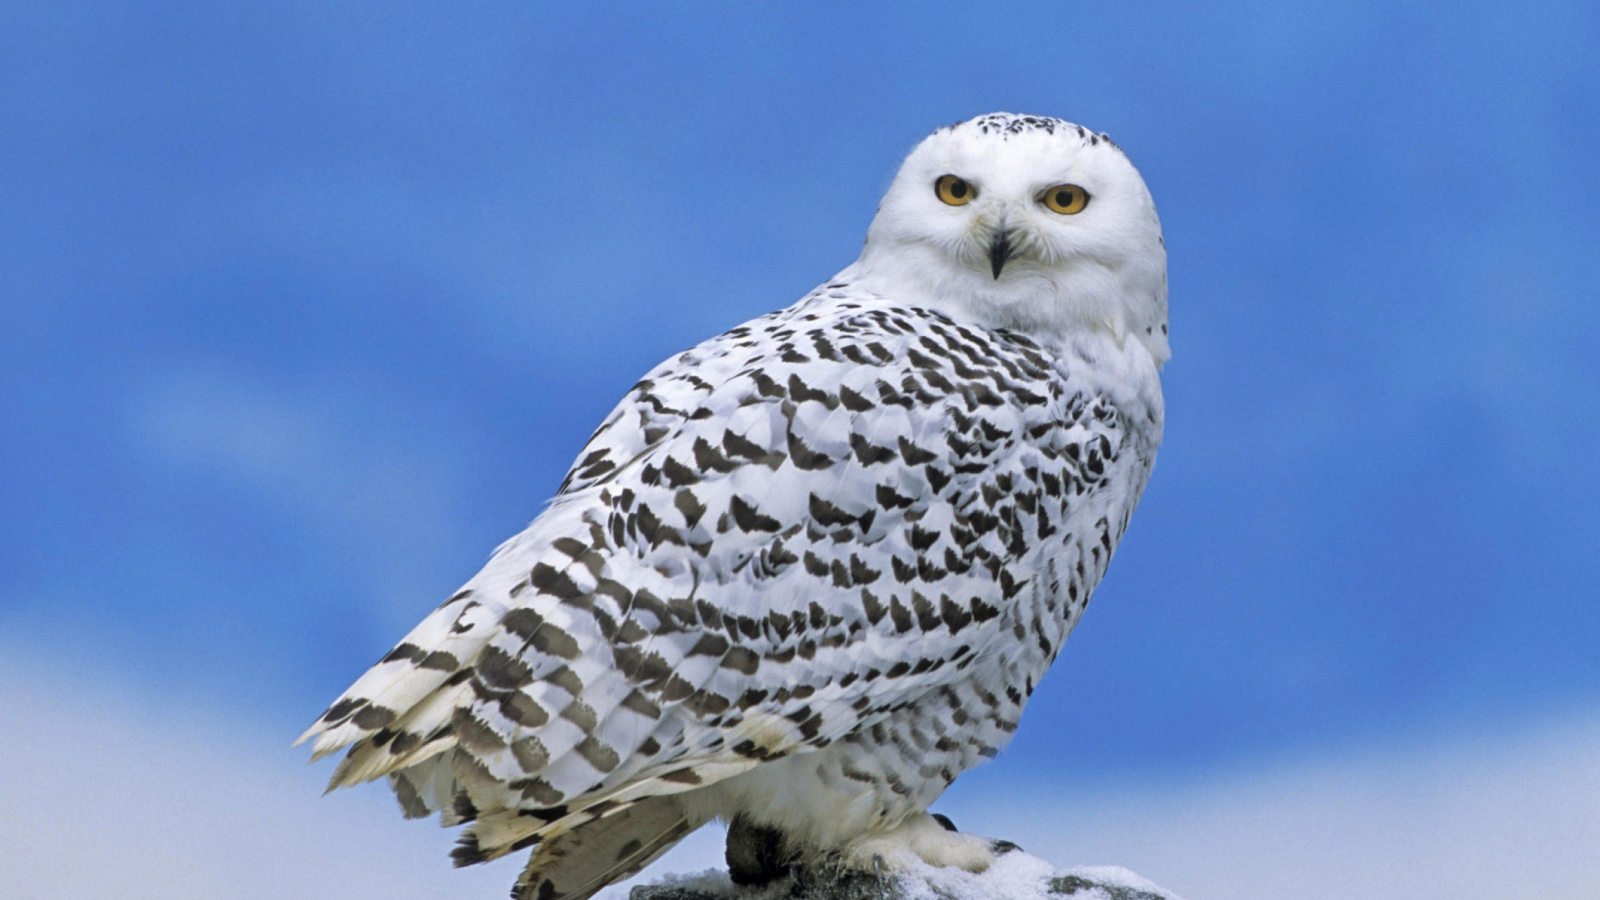 Snowy owl from Arctic wallpaper 1600x900